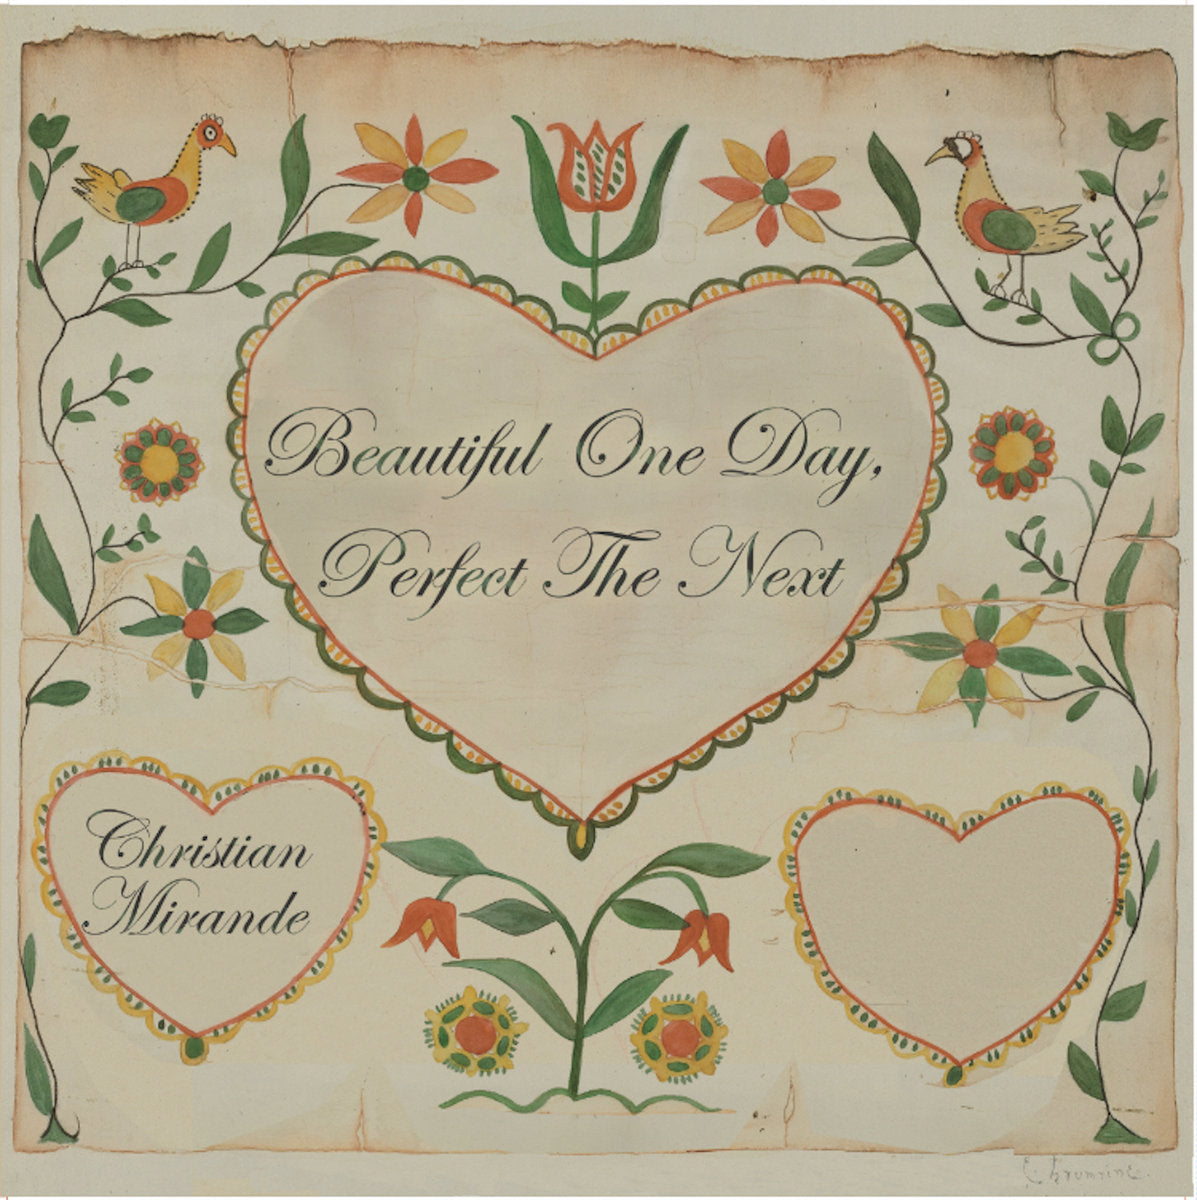 Christian Mirande - Beautiful One Day, Perfect The Next